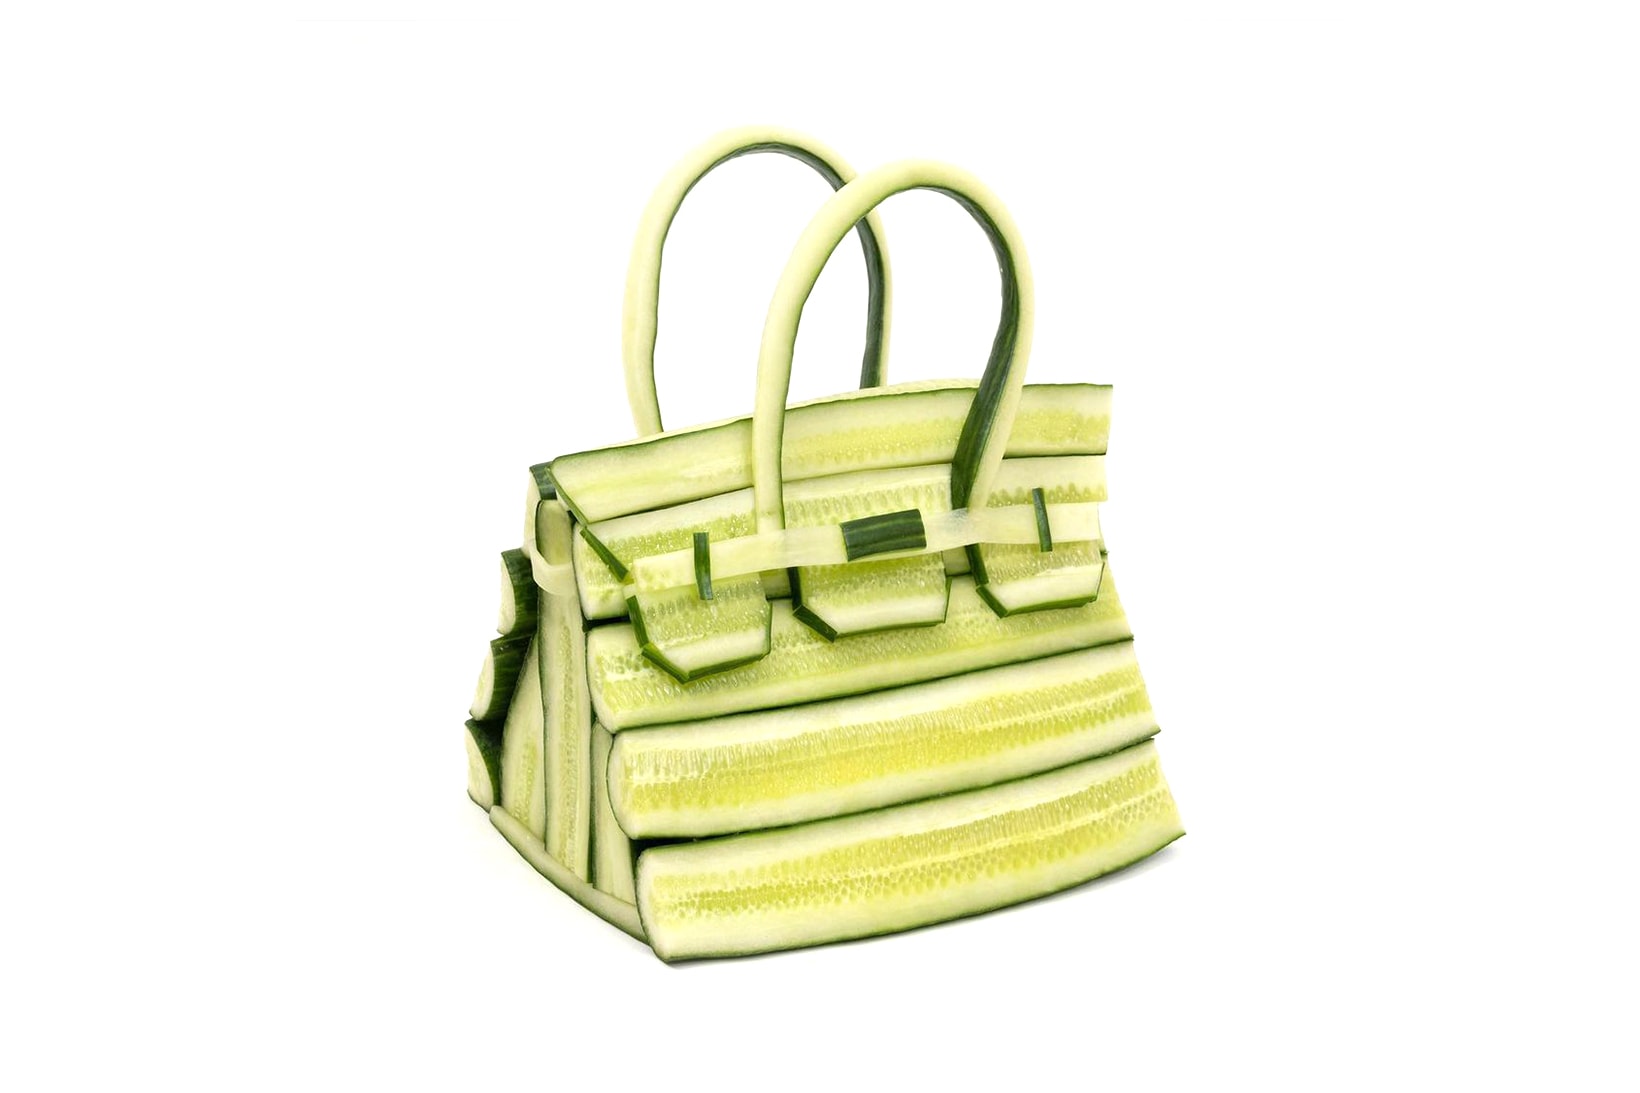 Asparagus, Cucumbers, and Cabbage Leaves Take a Fresh Twist on the Iconic  Hermès Birkin Bag — Colossal